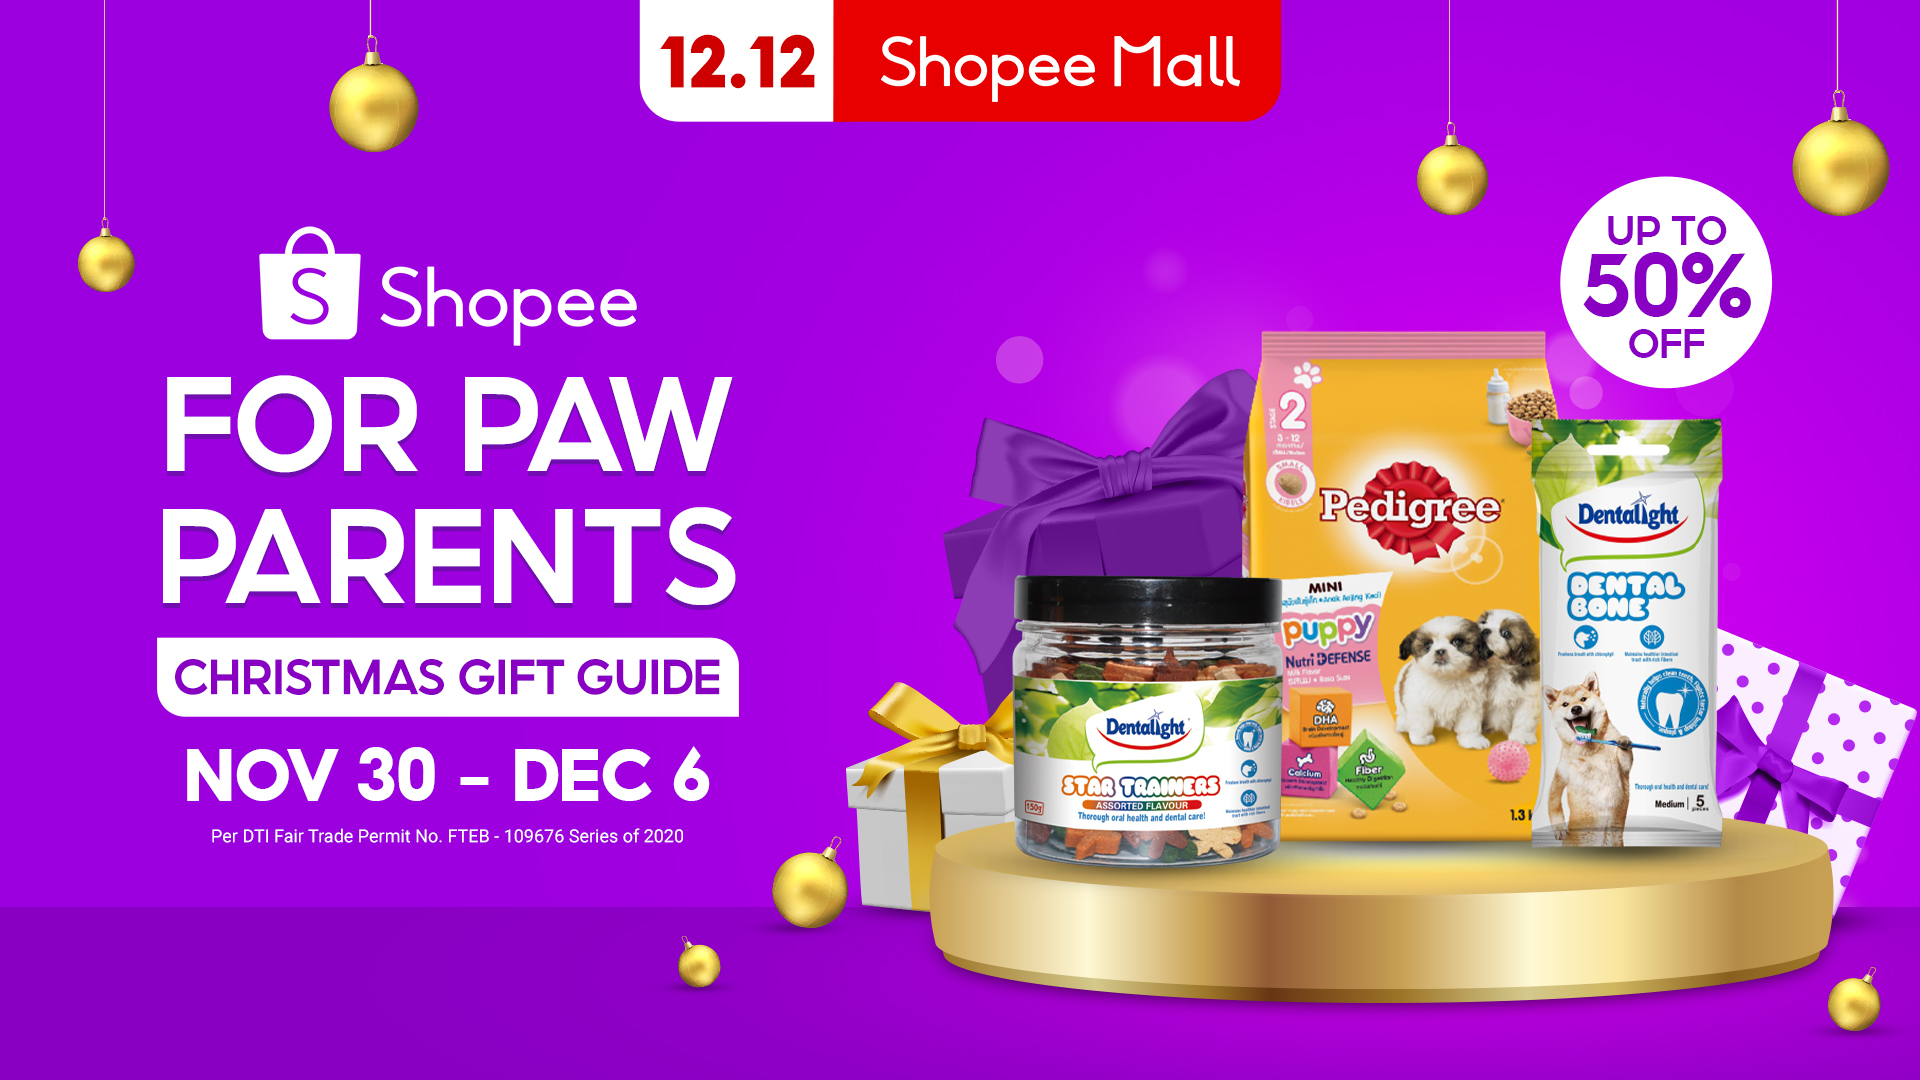 pet-products-are-on-sale-for-up-to-50-off-on-shopee-this-november-30